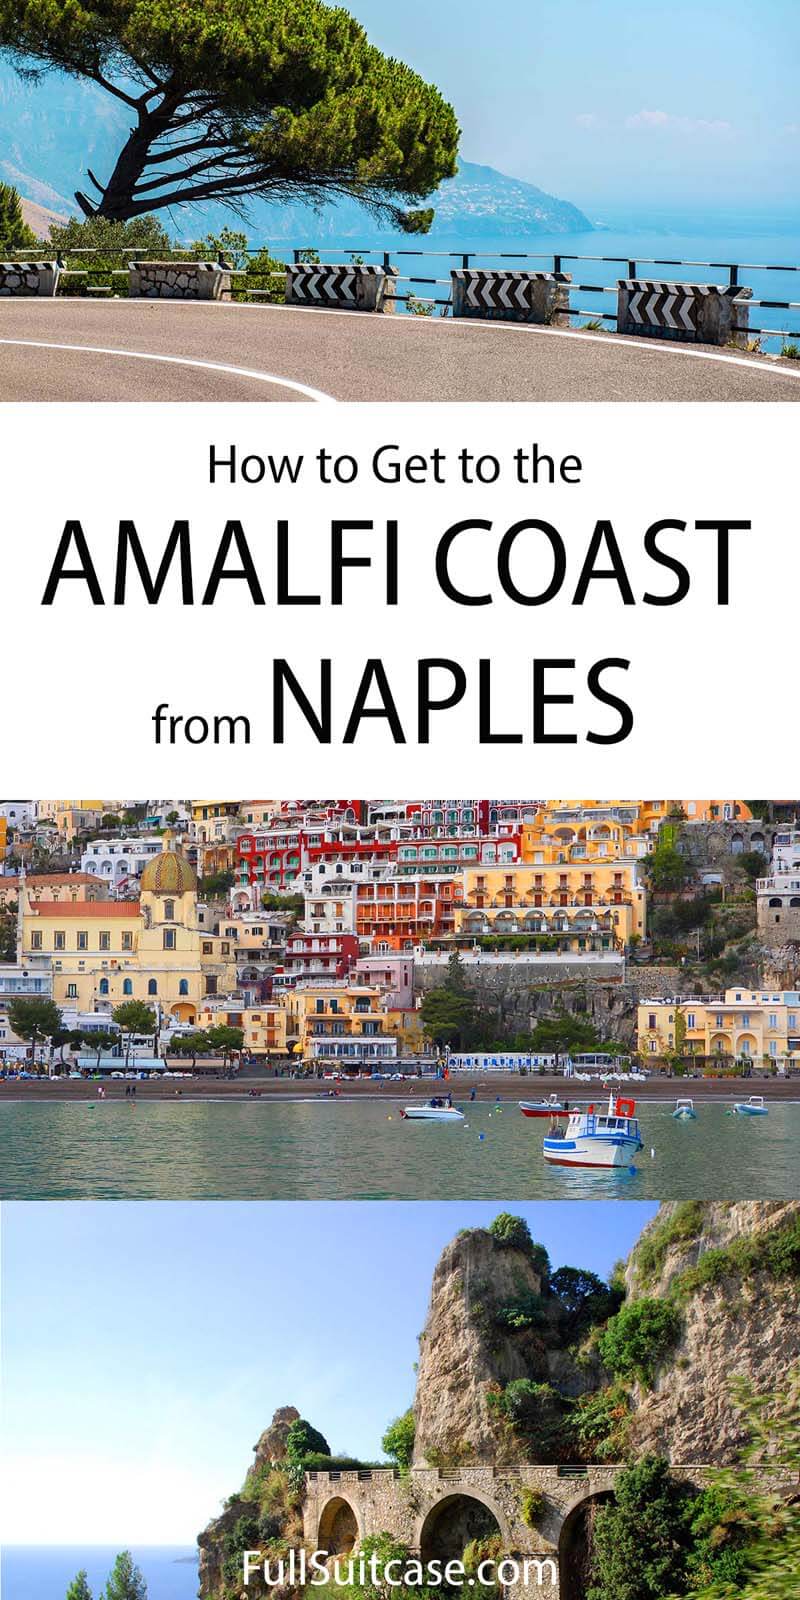 How to get from Naples to Amalfi Coast - by bus, car, transfer, boat, or tours